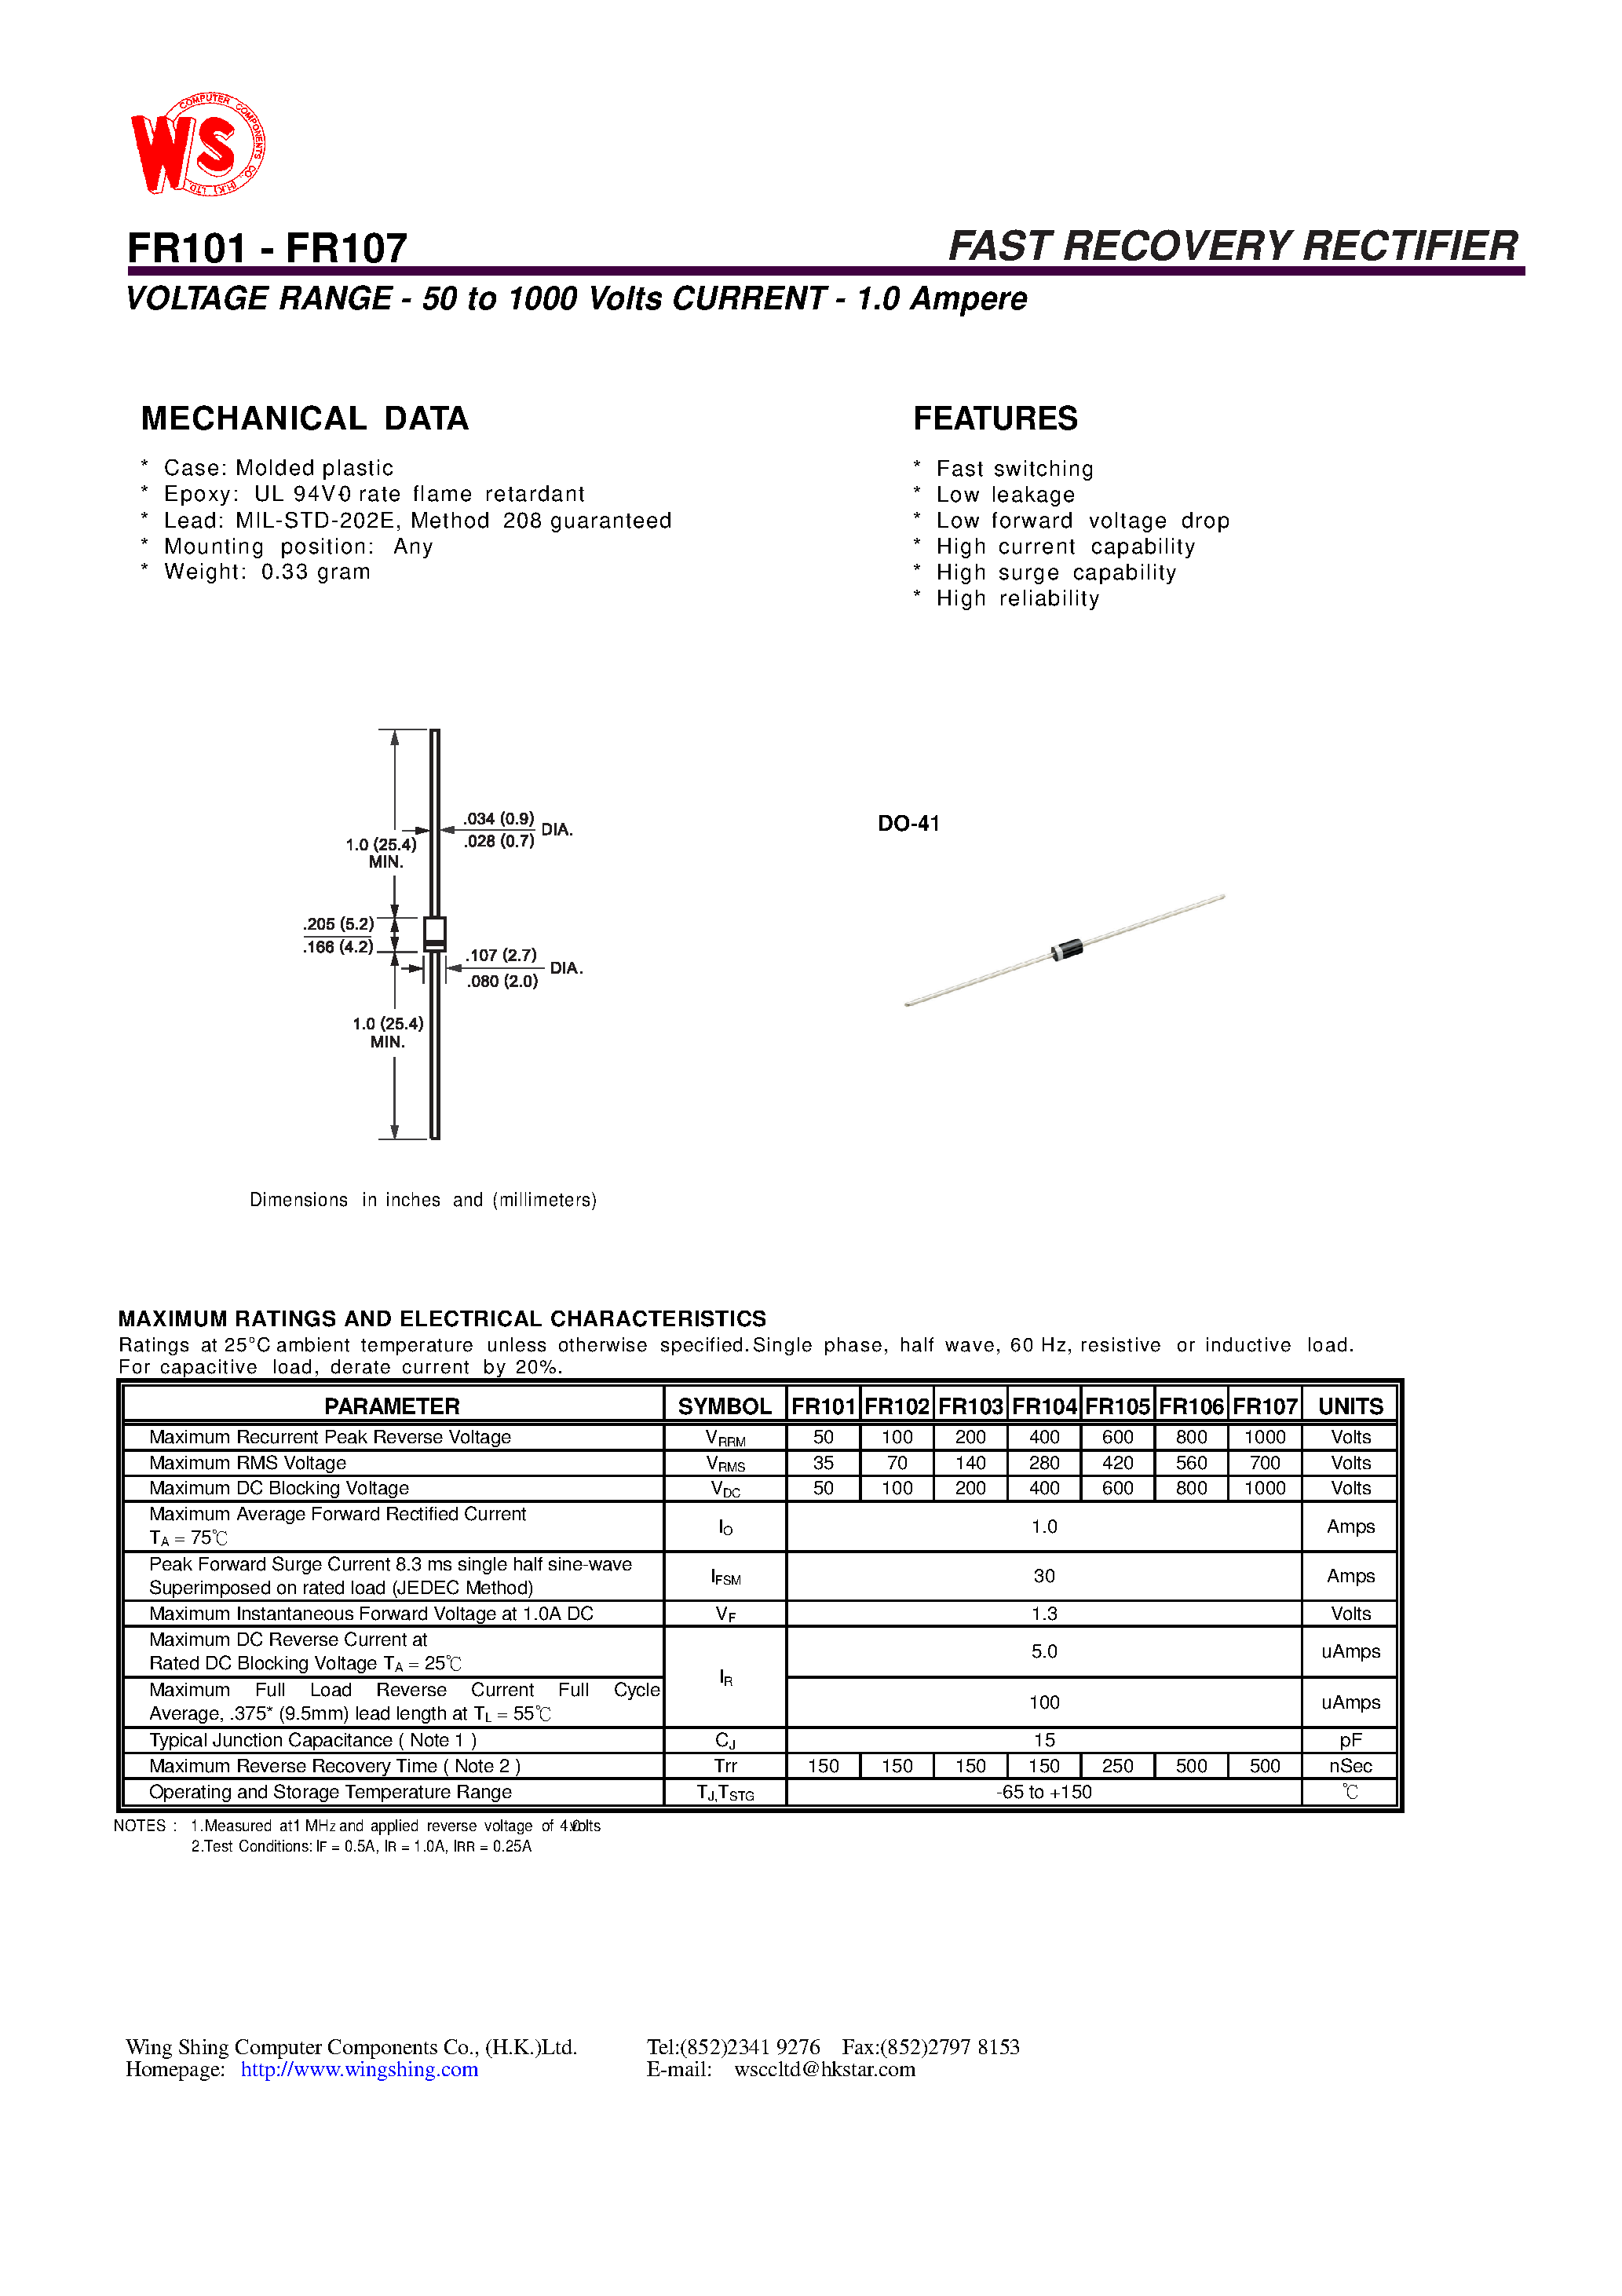 Datasheet FR101 - FAST RECOVERY RECTIFIER(VOLTAGE RANGE - 50 to 1000 Volts CURRENT - 1.0 Ampere) page 1